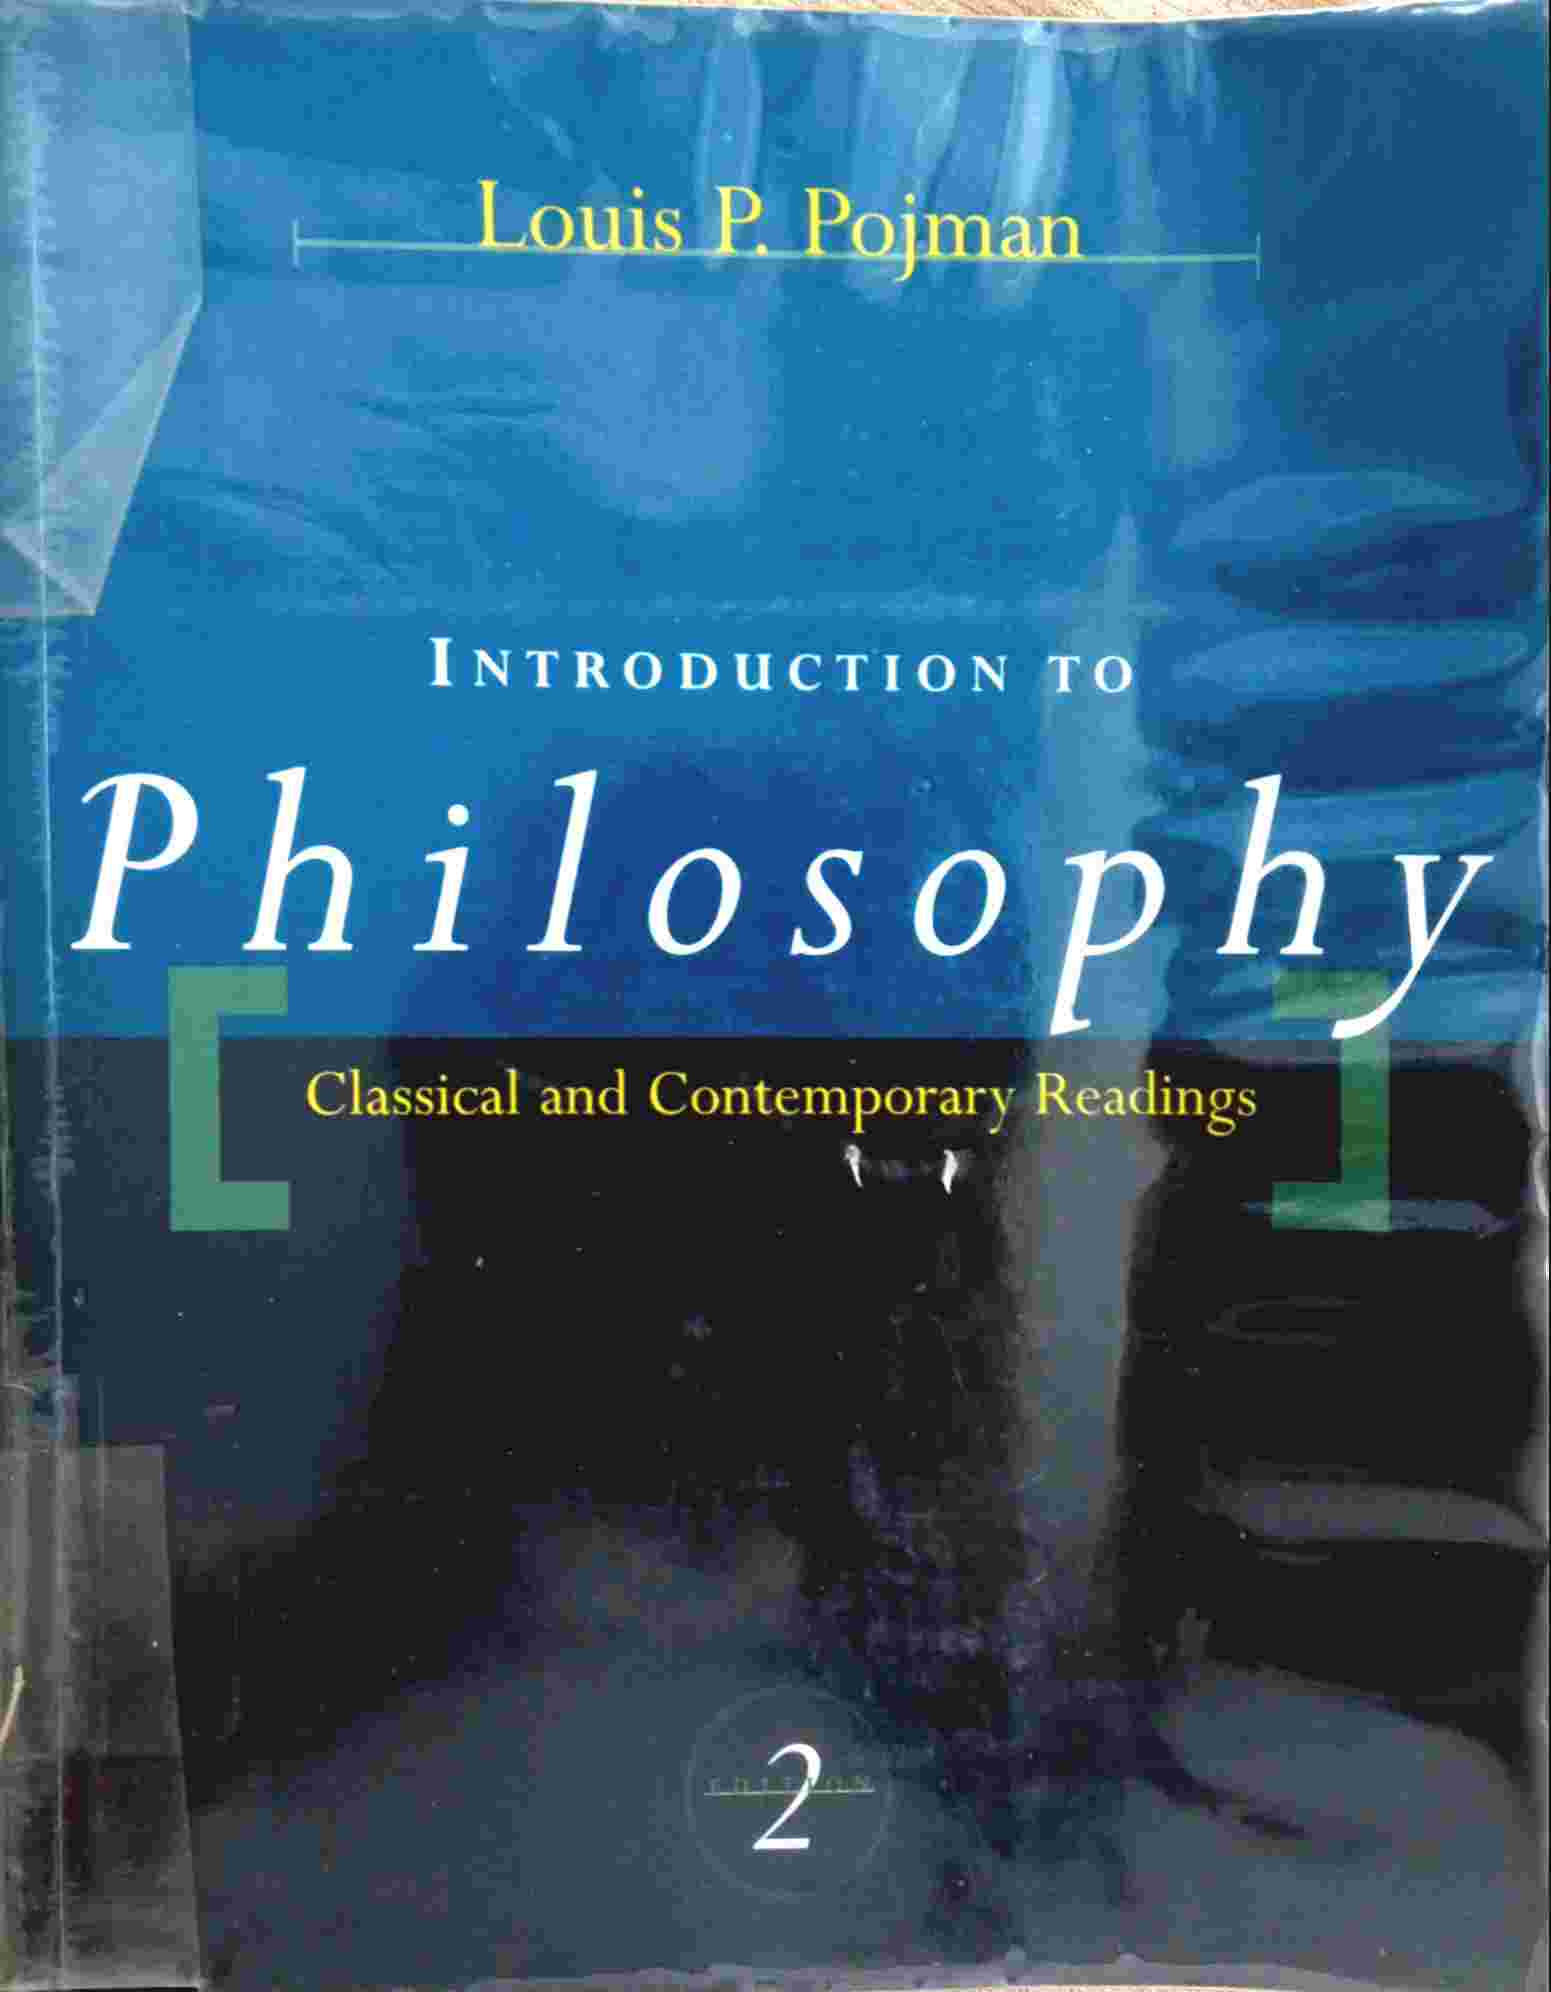 INTRODUCTION TO PHILOSOPHY: CLASSICAL AND CONTEMPORARY READINGS